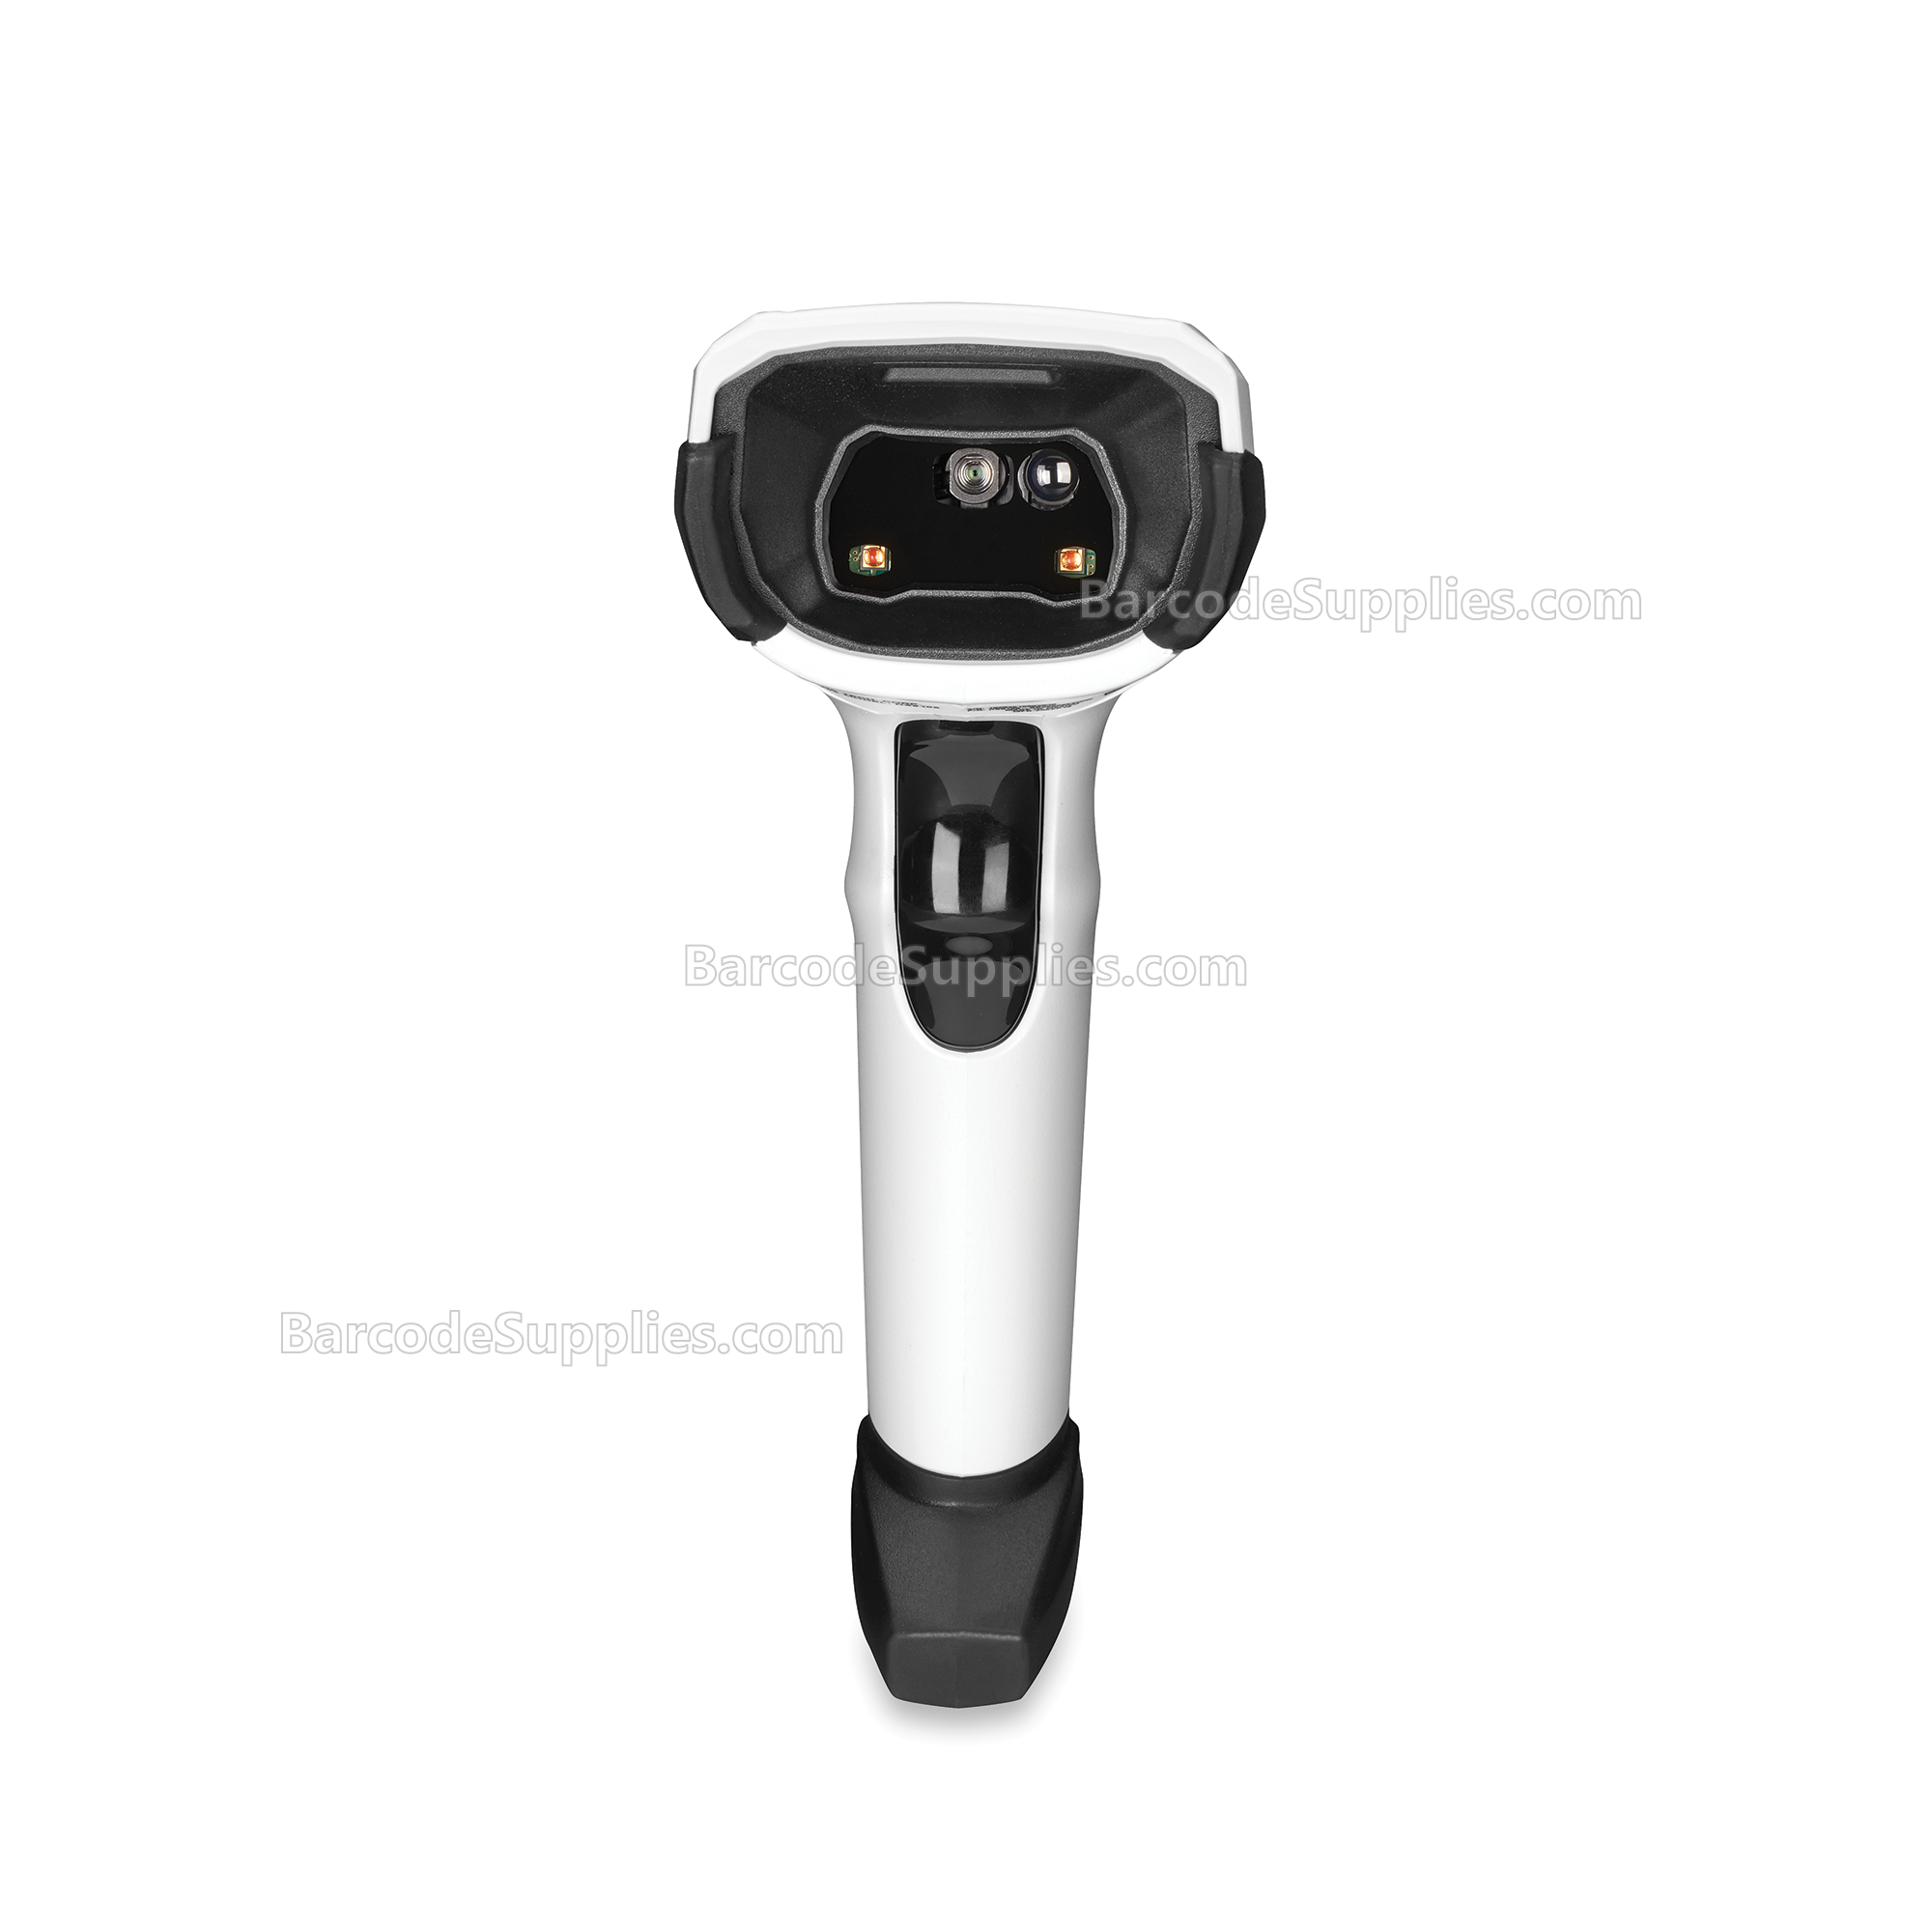 DS8108-SR White (with Stand) (Cable Not Included) KIT: DS8108-SR00006ZZWW Scanner, 20-71043-04R Stand